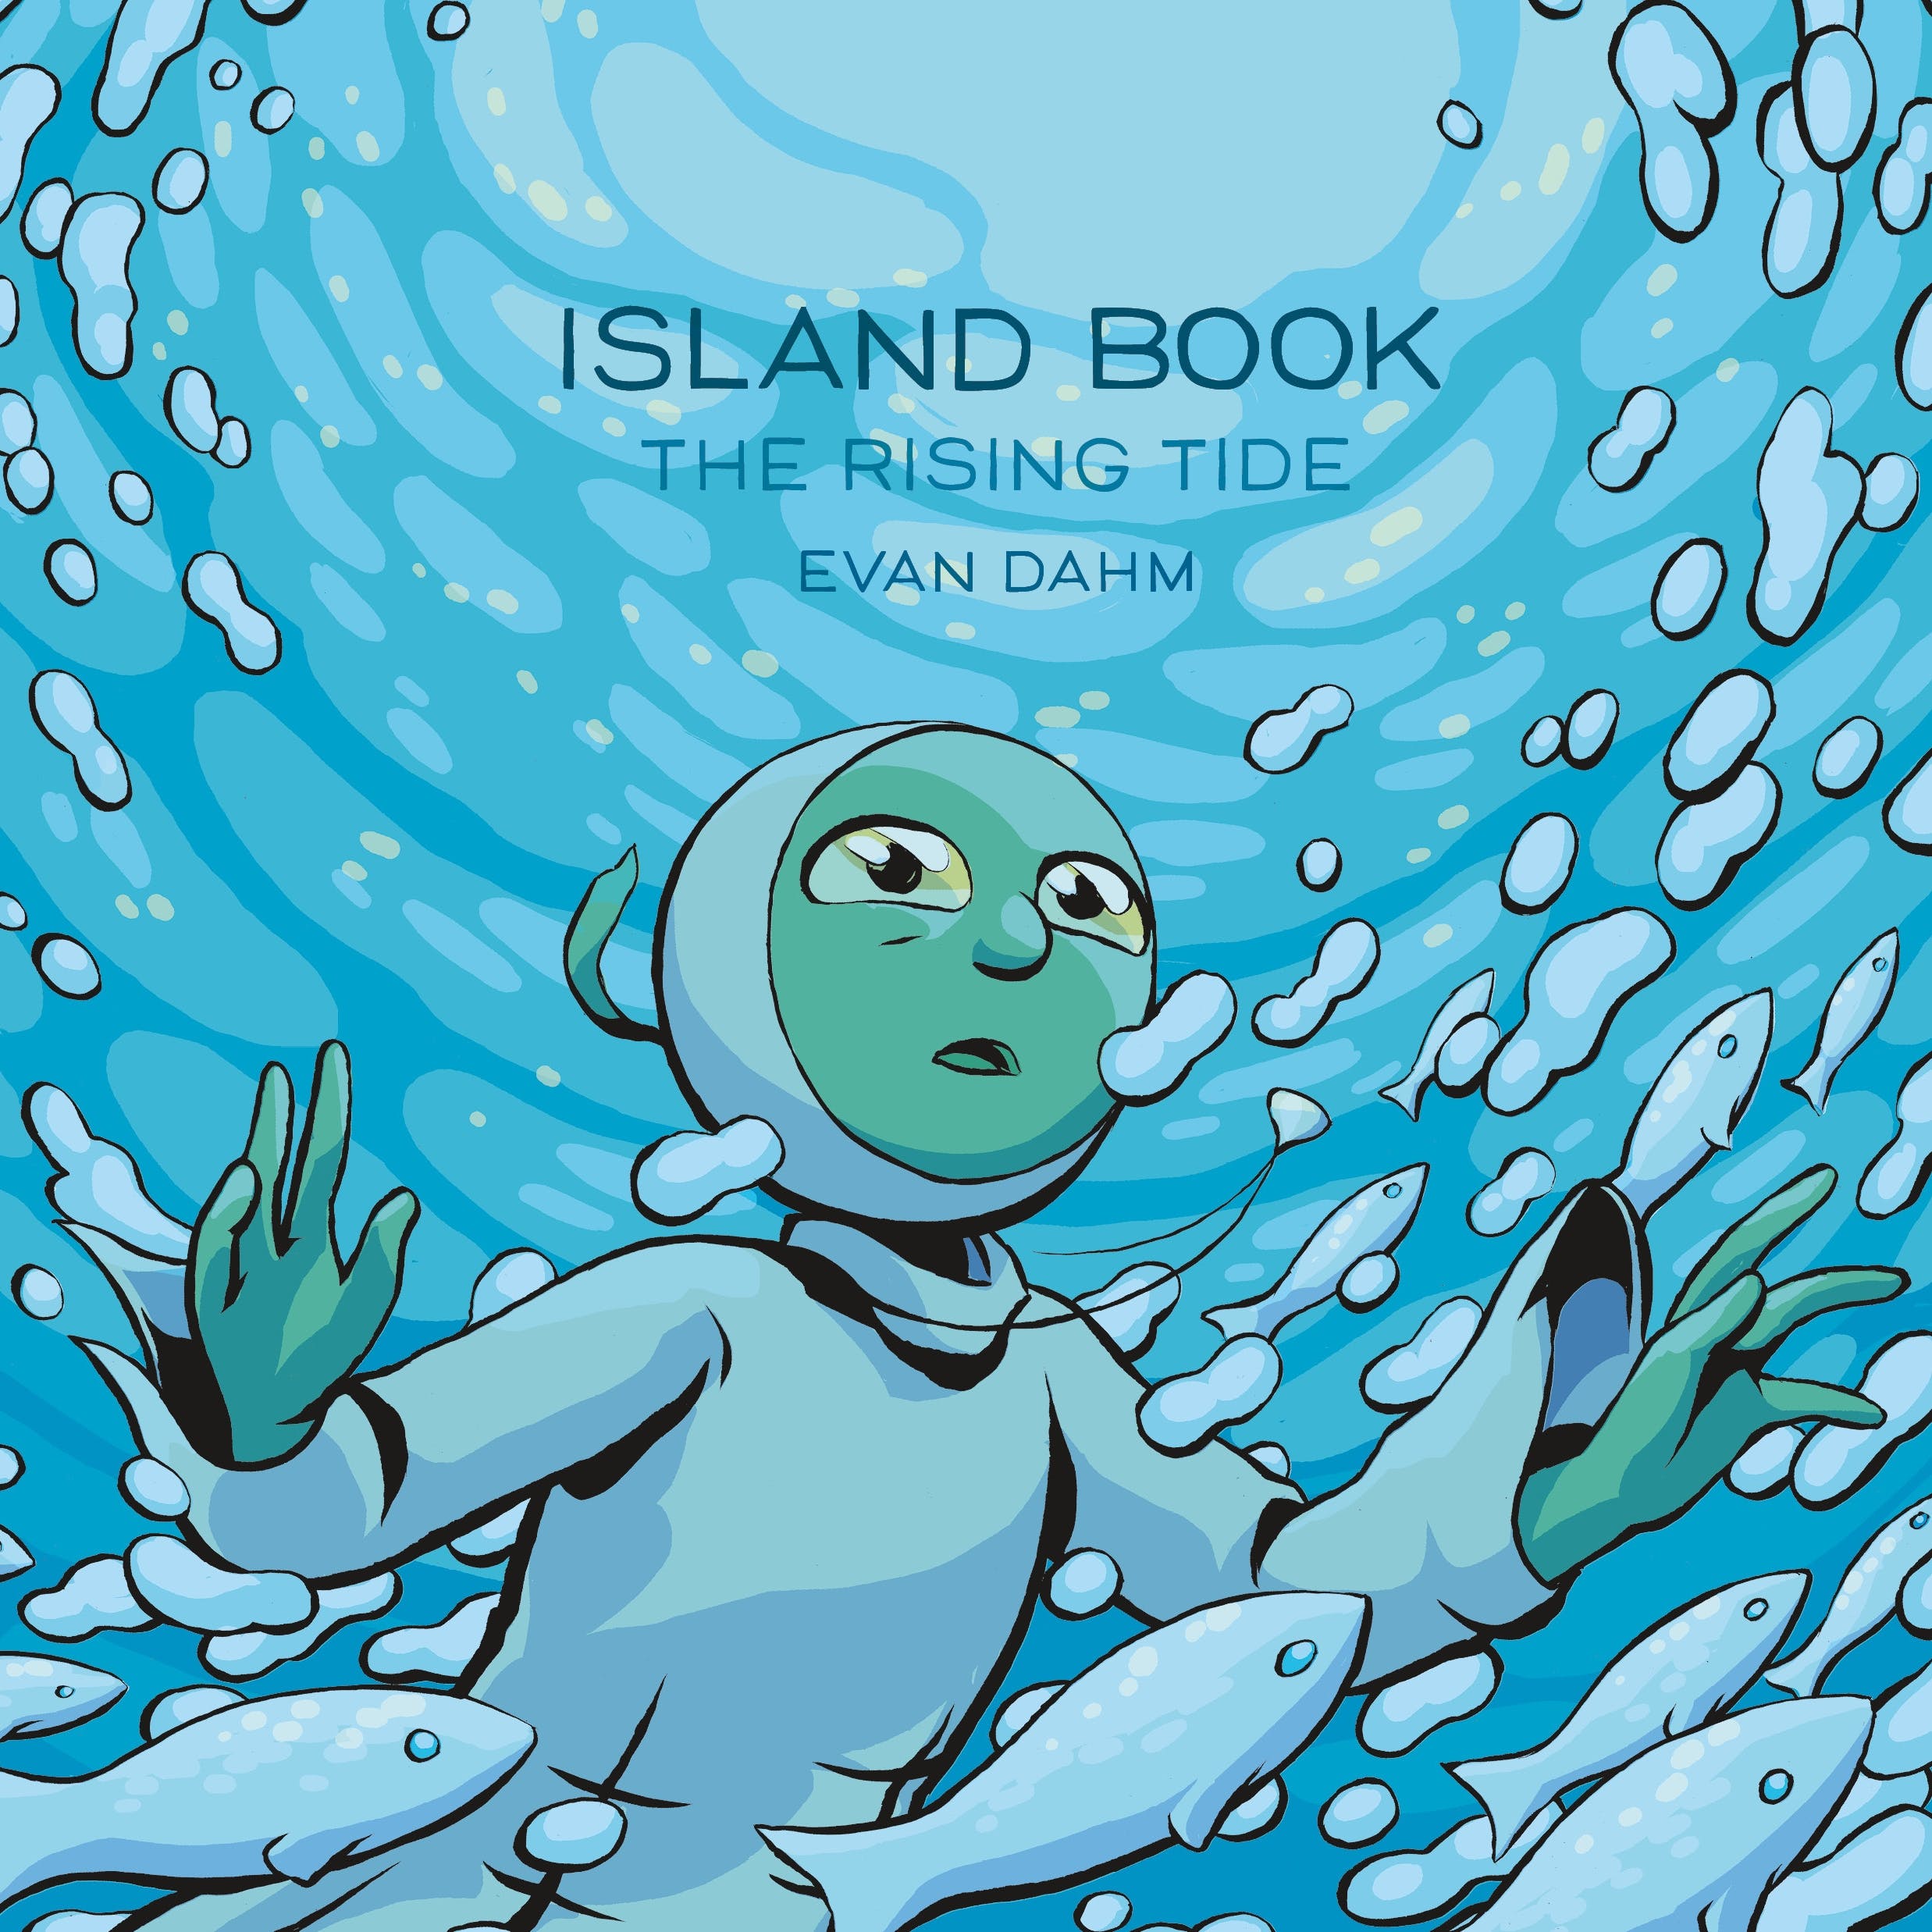 Image for "Island Book: The Rising Tide"